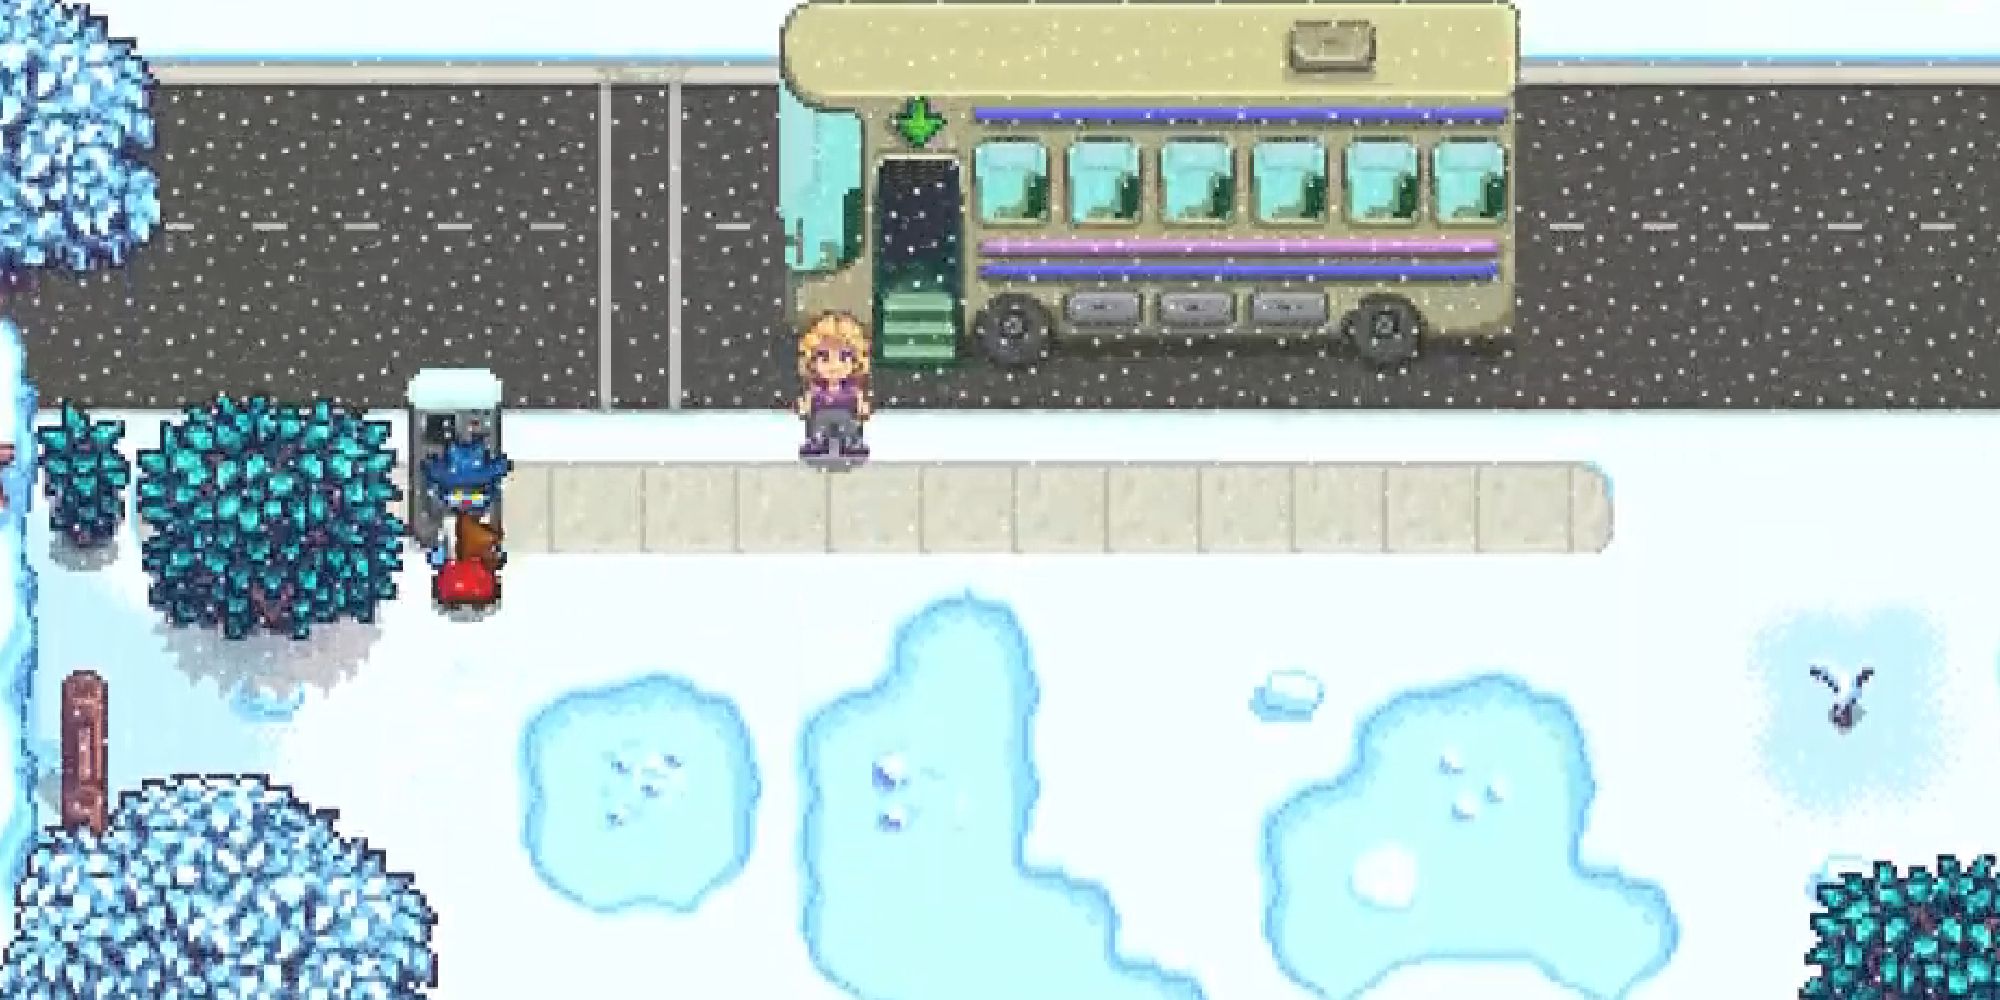 stardew valley player and pam at bus stop